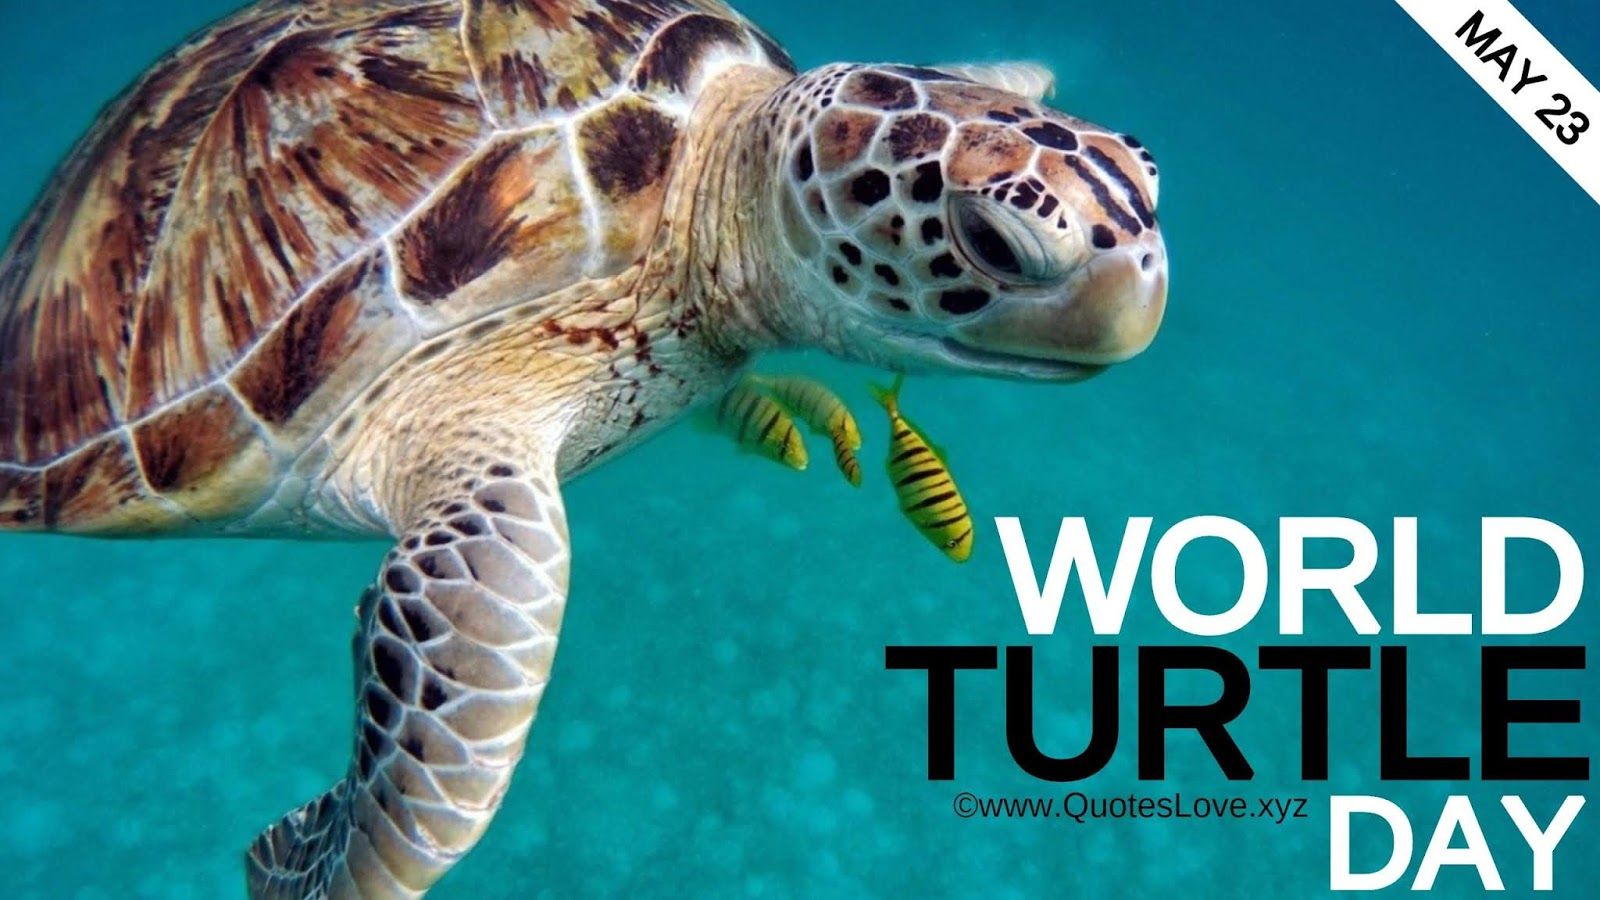 [Best] World Turtle Day 2021: Quotes, Sayings, Messages, Greetings, Facts, Image, Picture, Photo, Wallpaper